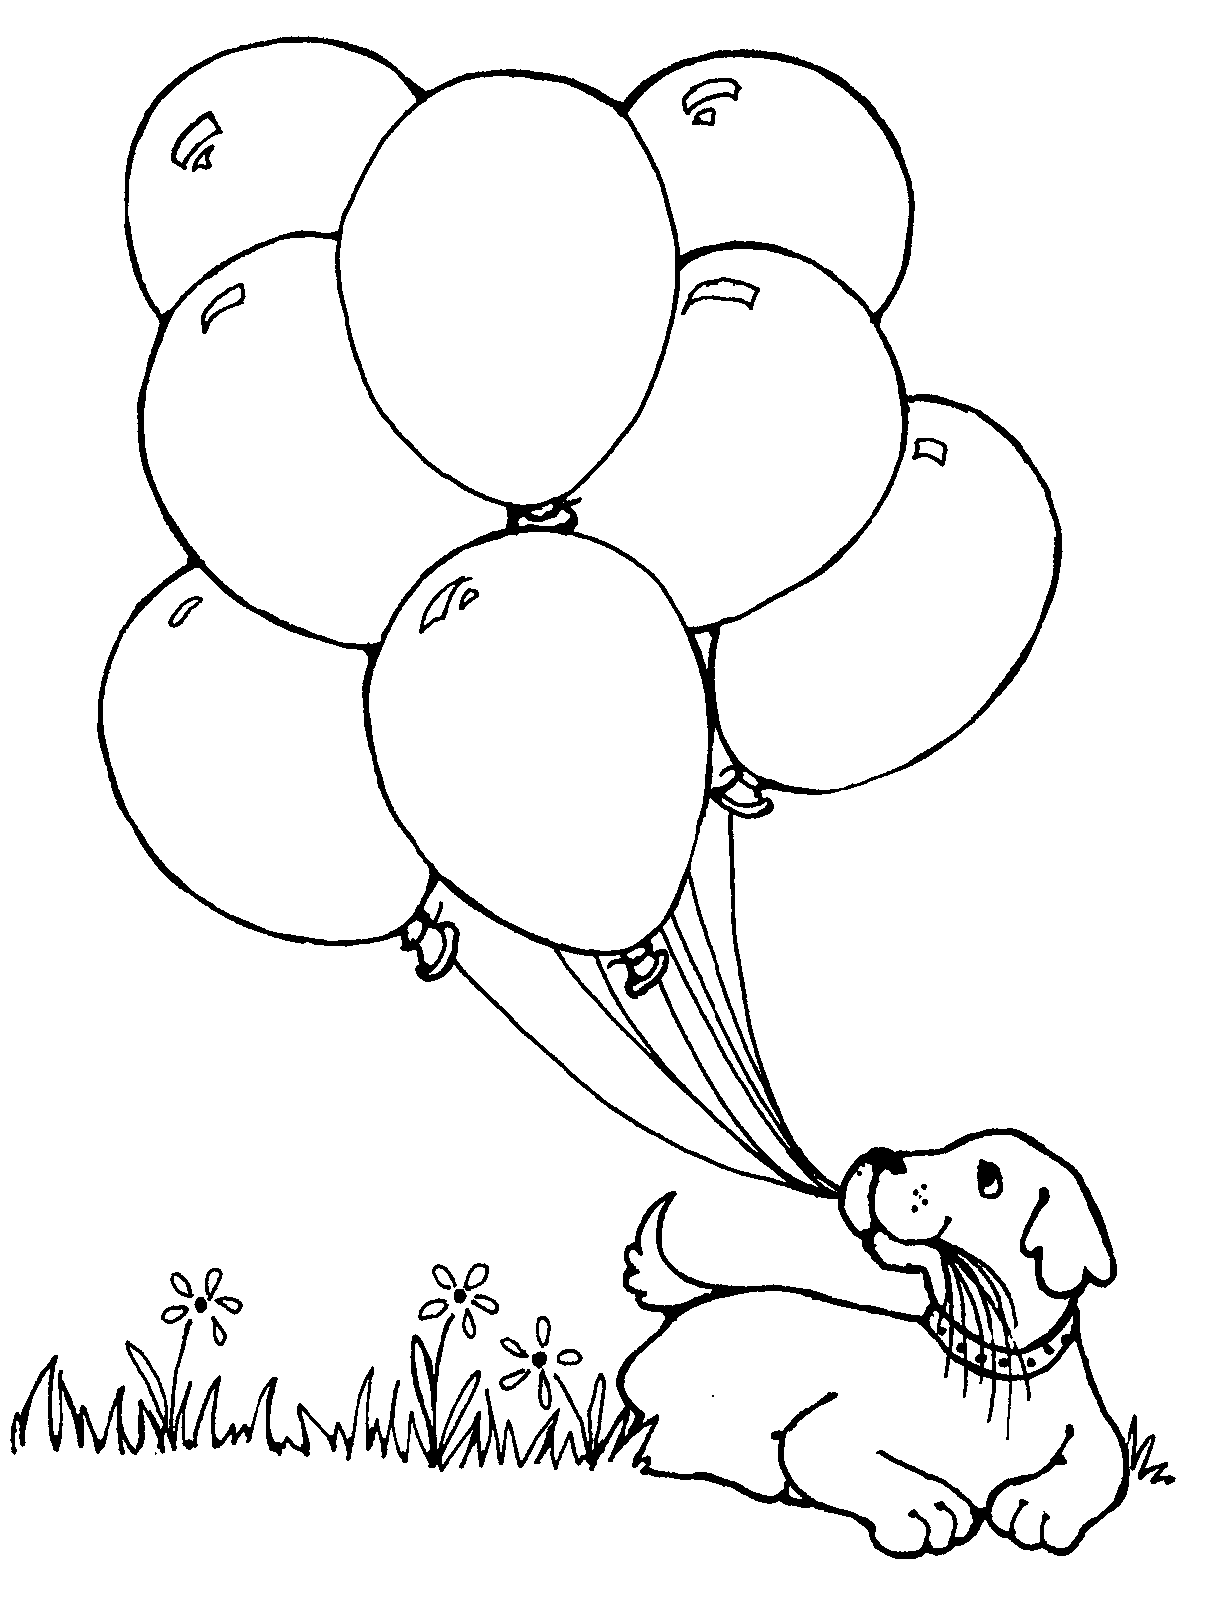 clipart balloons black and white - photo #45